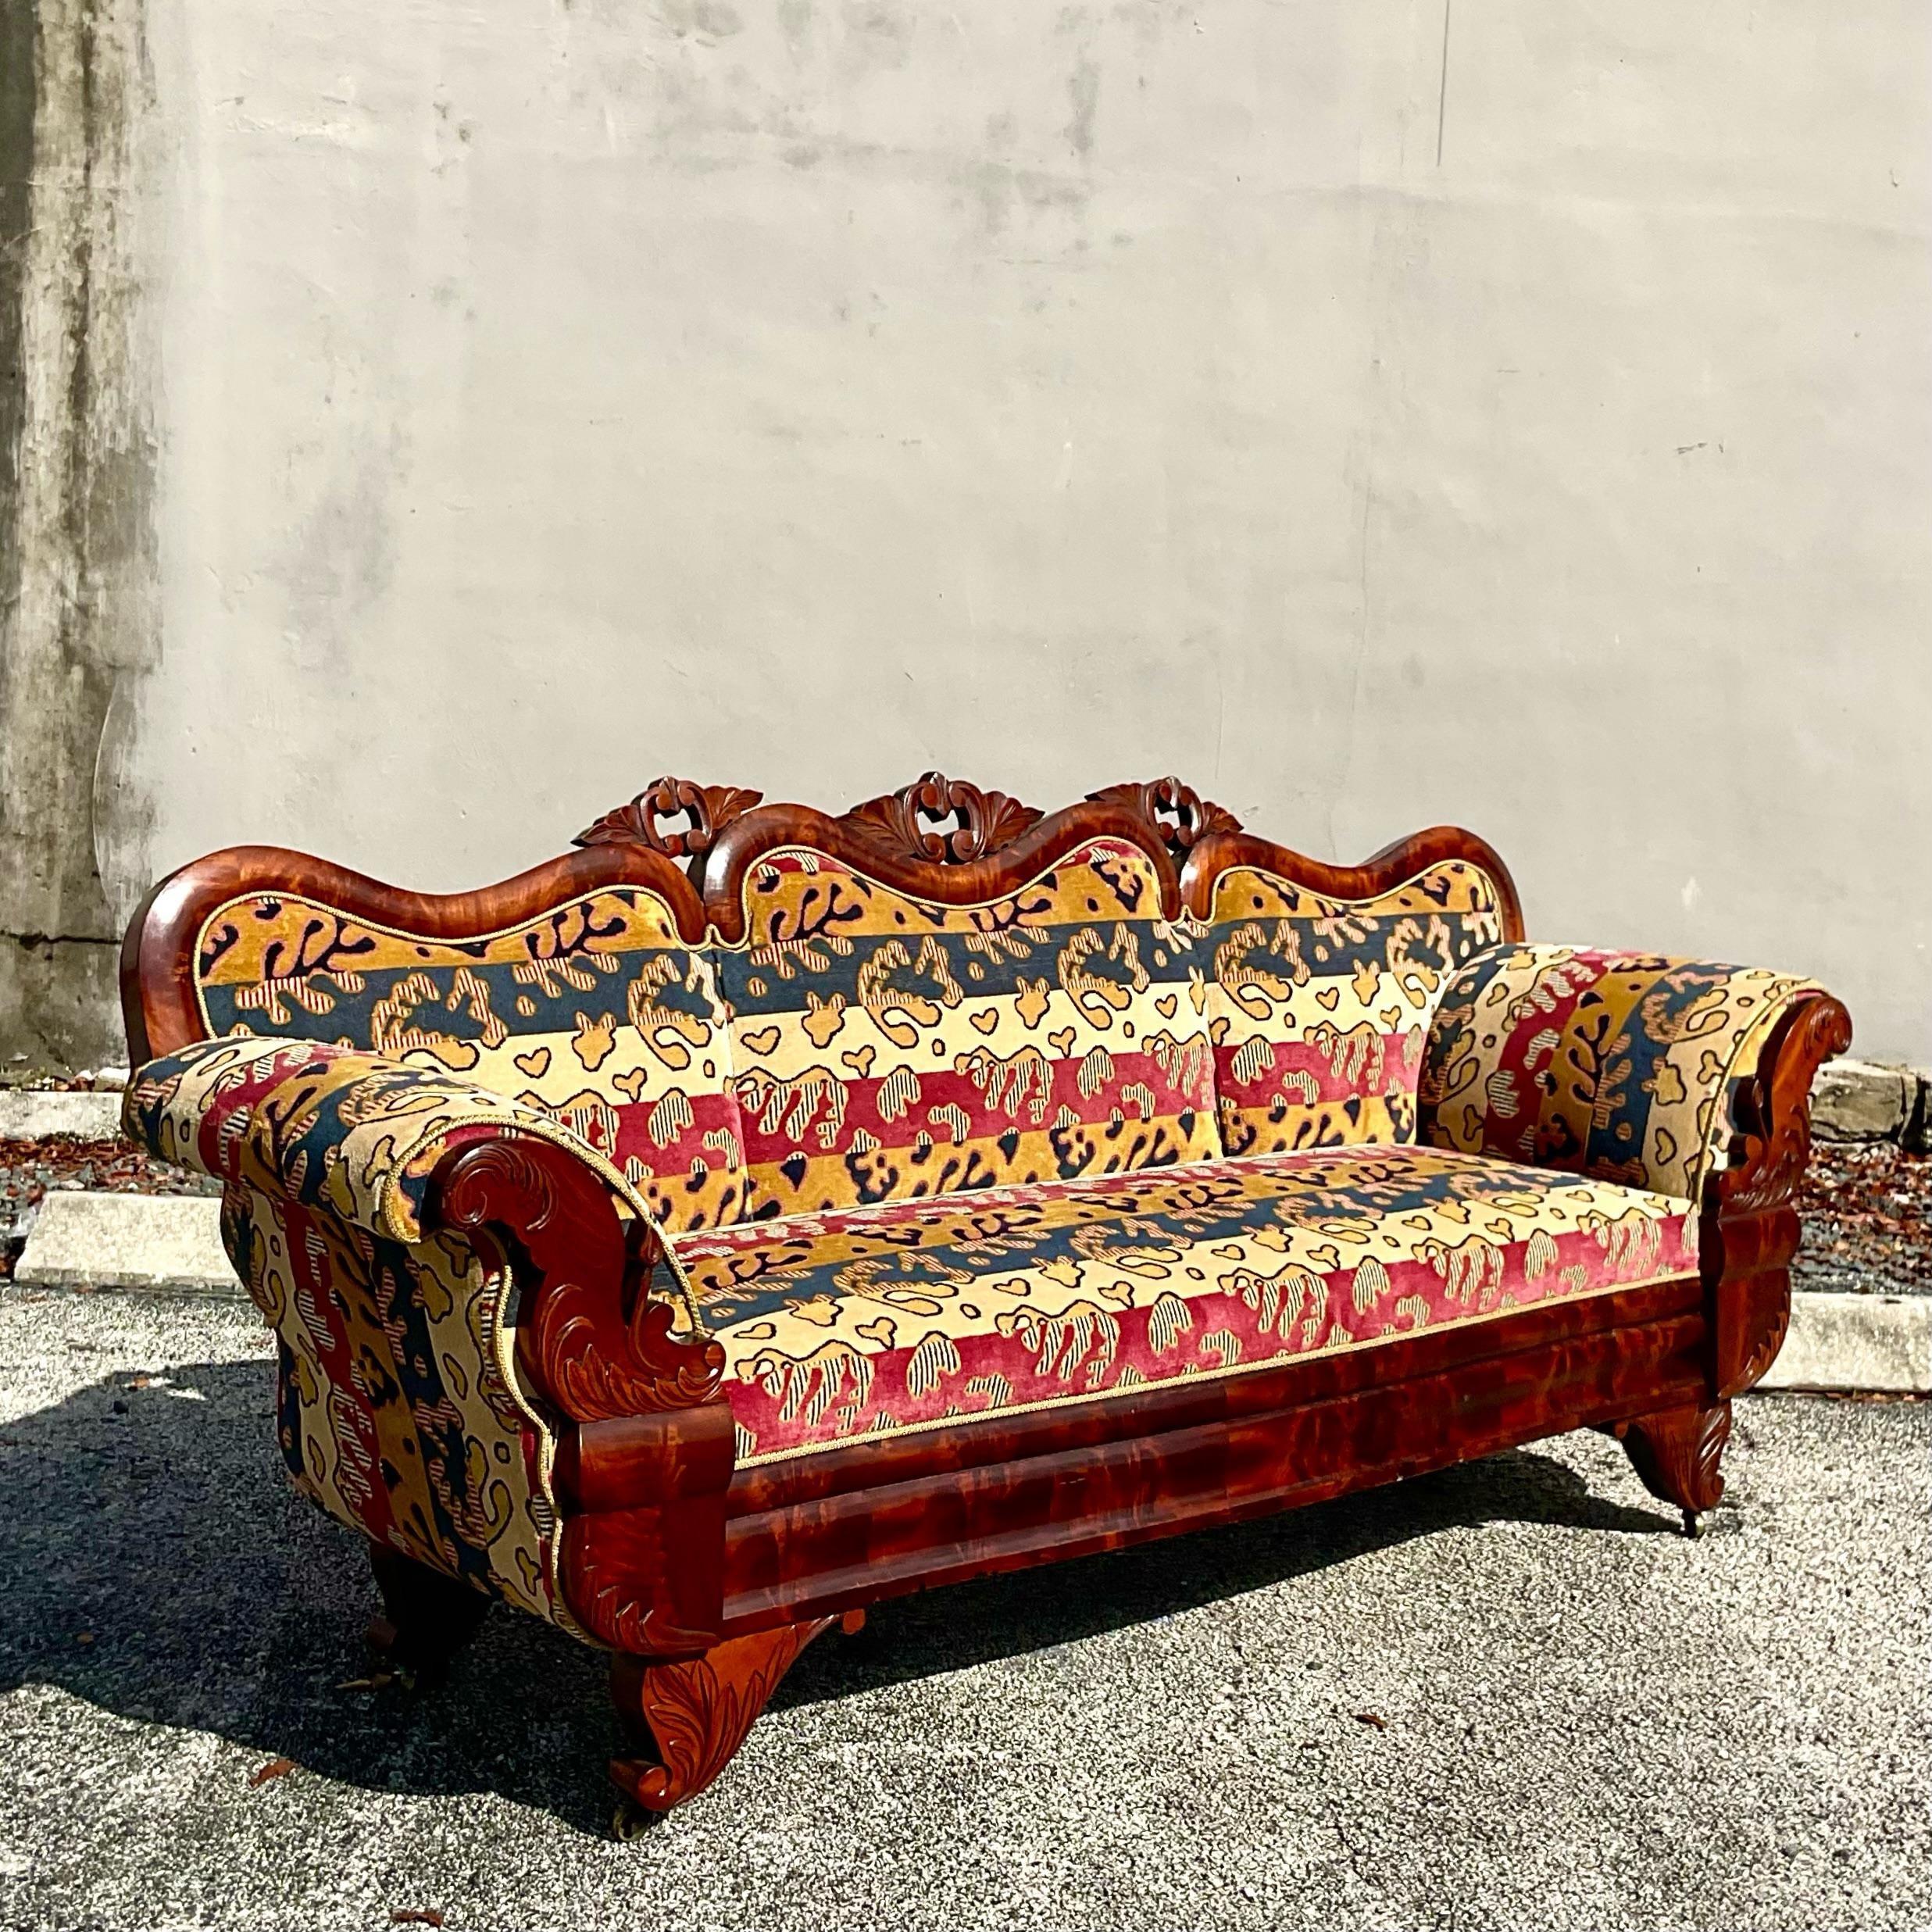 Dramatic elegant rococo style carved intricate sofa upholstered in Clearance House Amelie Linen Velvet in Navy Red fabric. This immaculate sofa is dripping in custom details from the woven fabric front with delicate wood carving crown and body